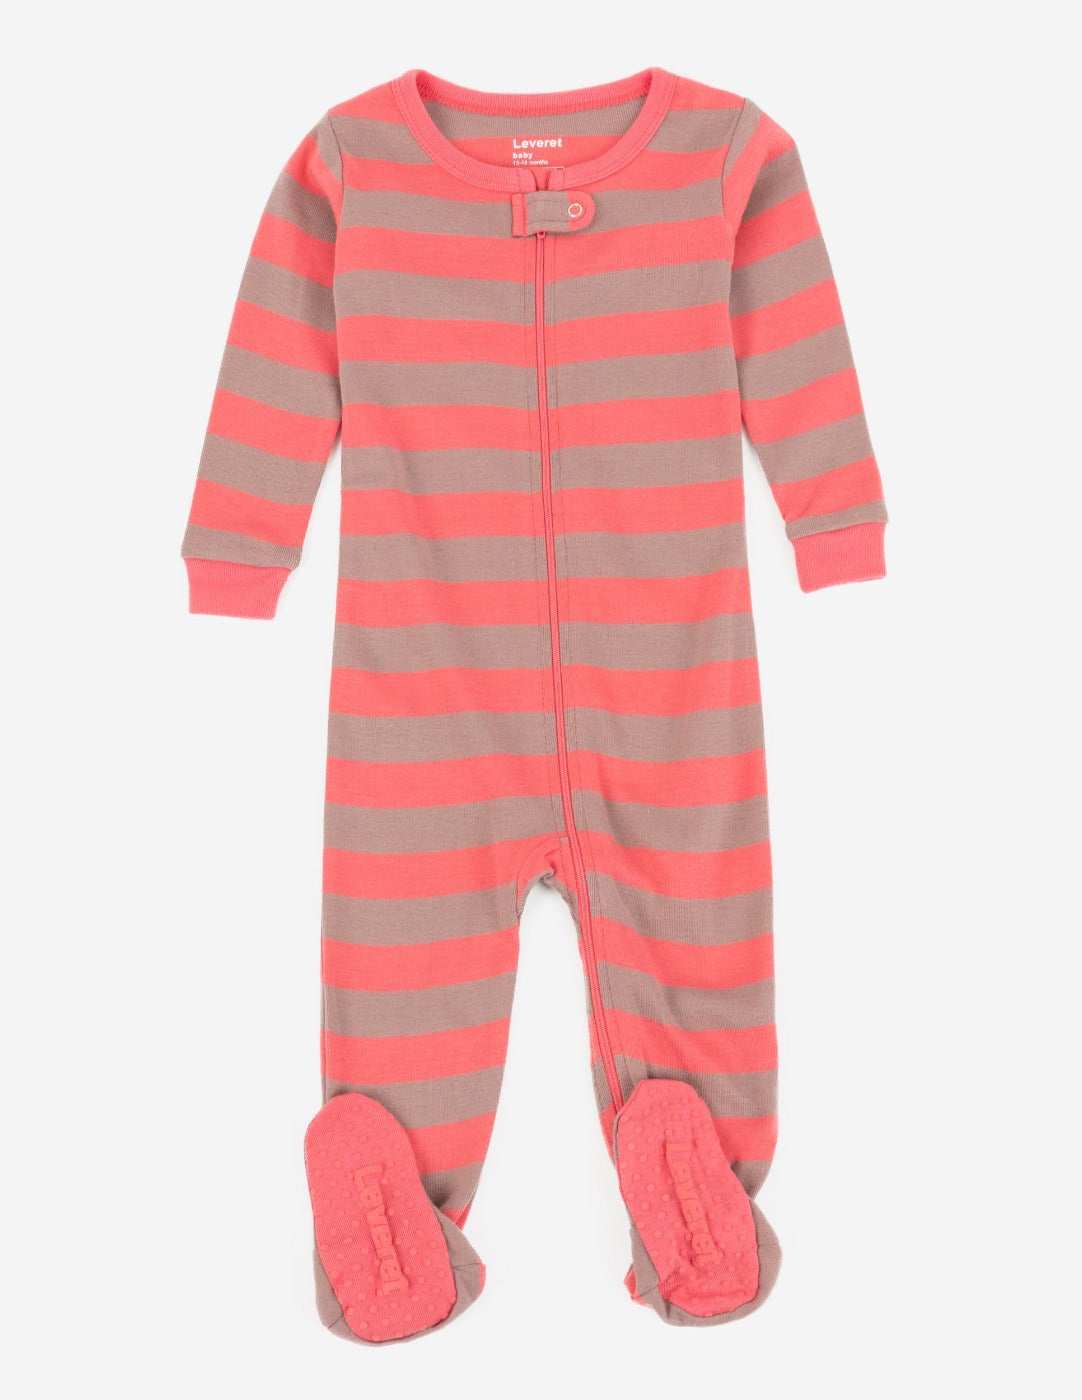 Baby Footed Pink Striped Pajamas